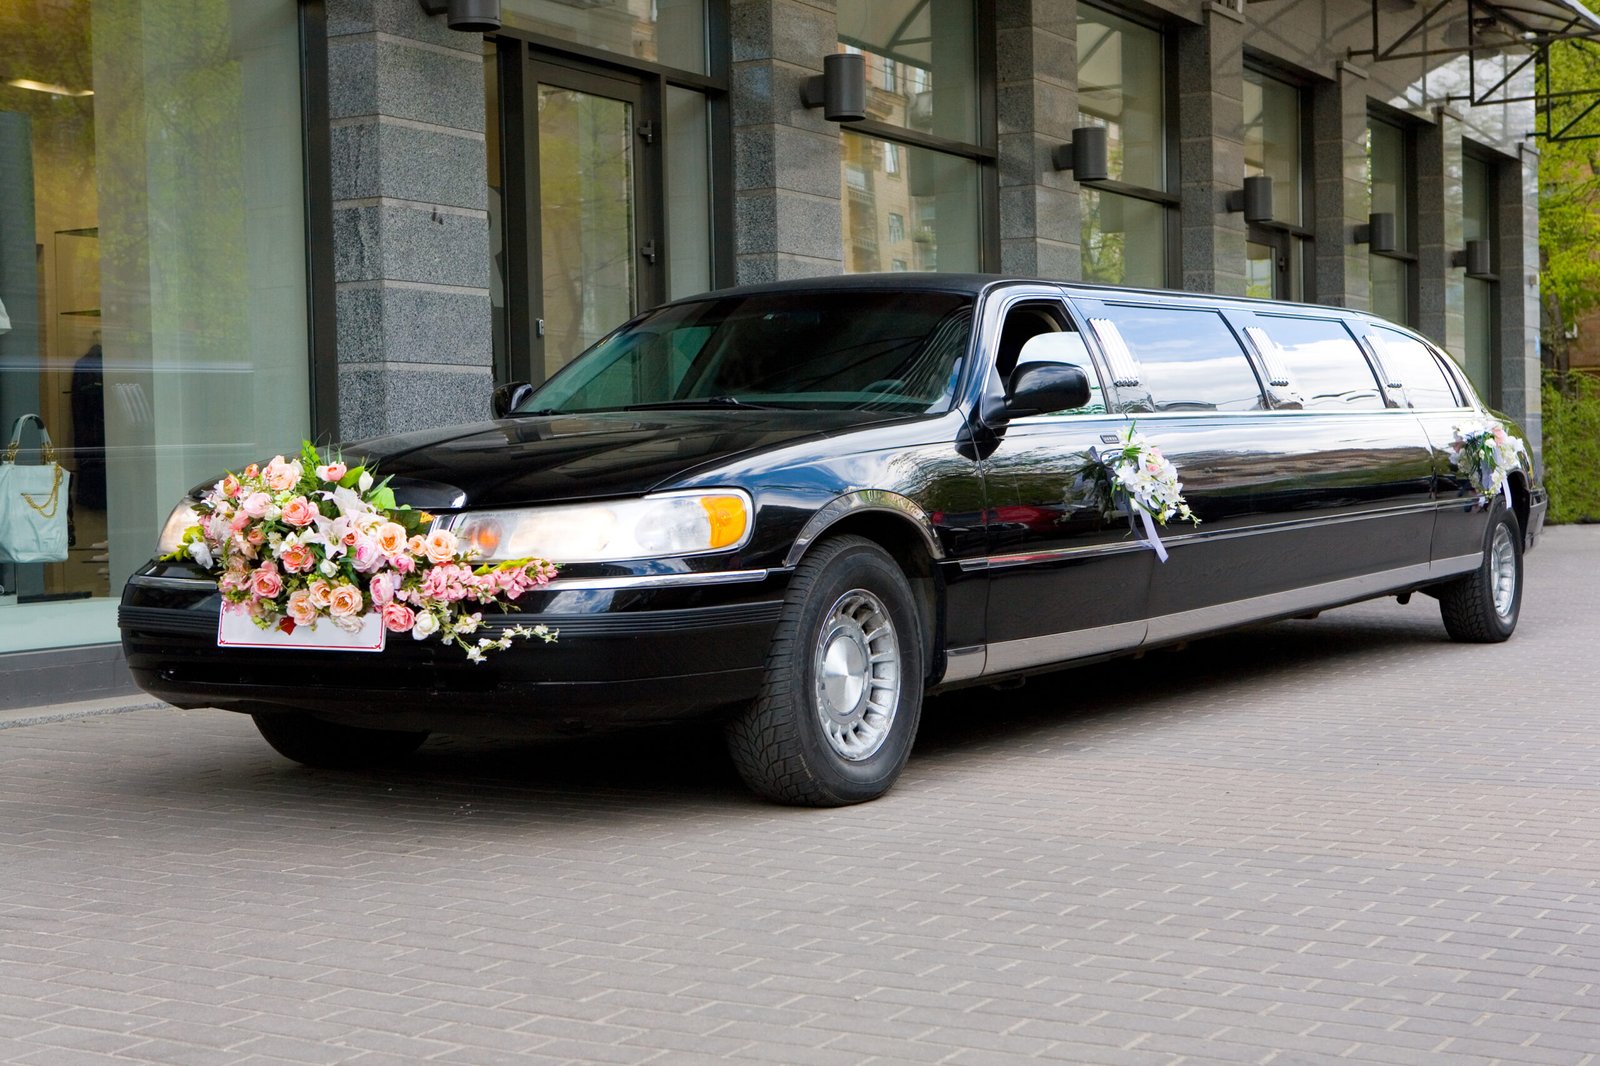 <strong>A Class Apart: Embracing Walnut Creek’s Finest Limo Service Experience</strong>